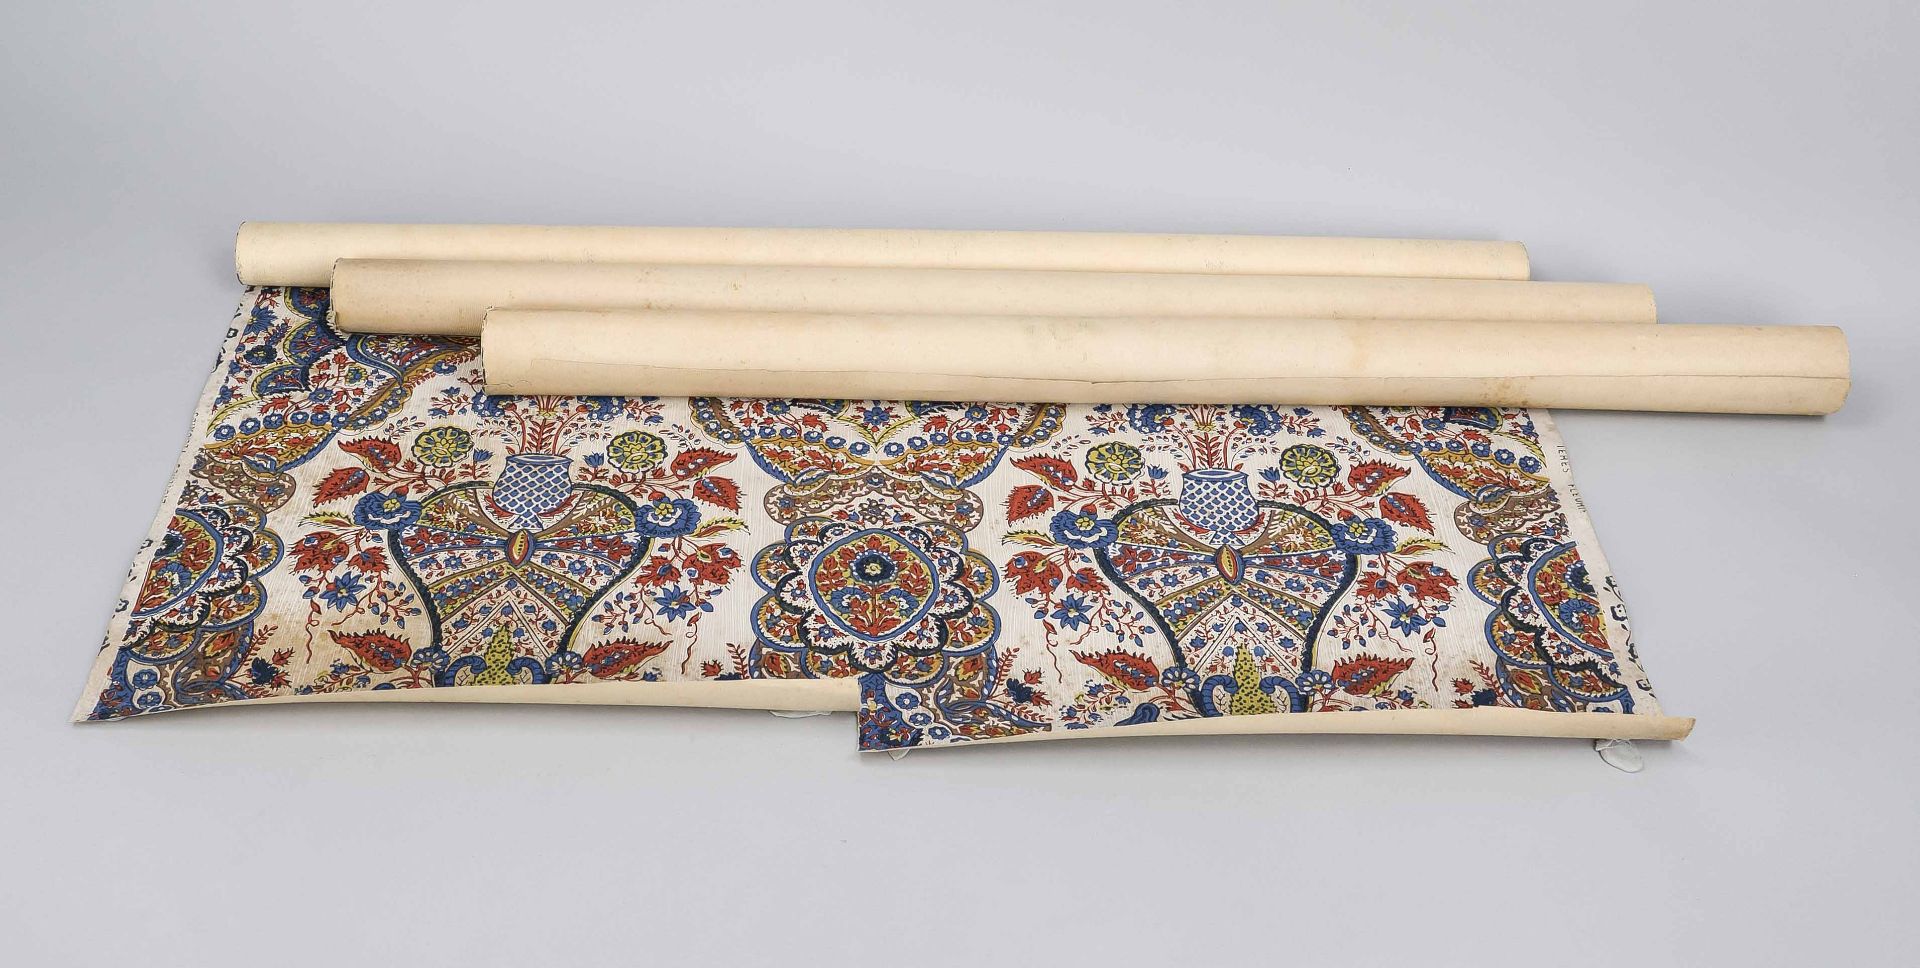 3 rolls of historical wallpaper from around 1900, colored floral decor, w. 75 cm